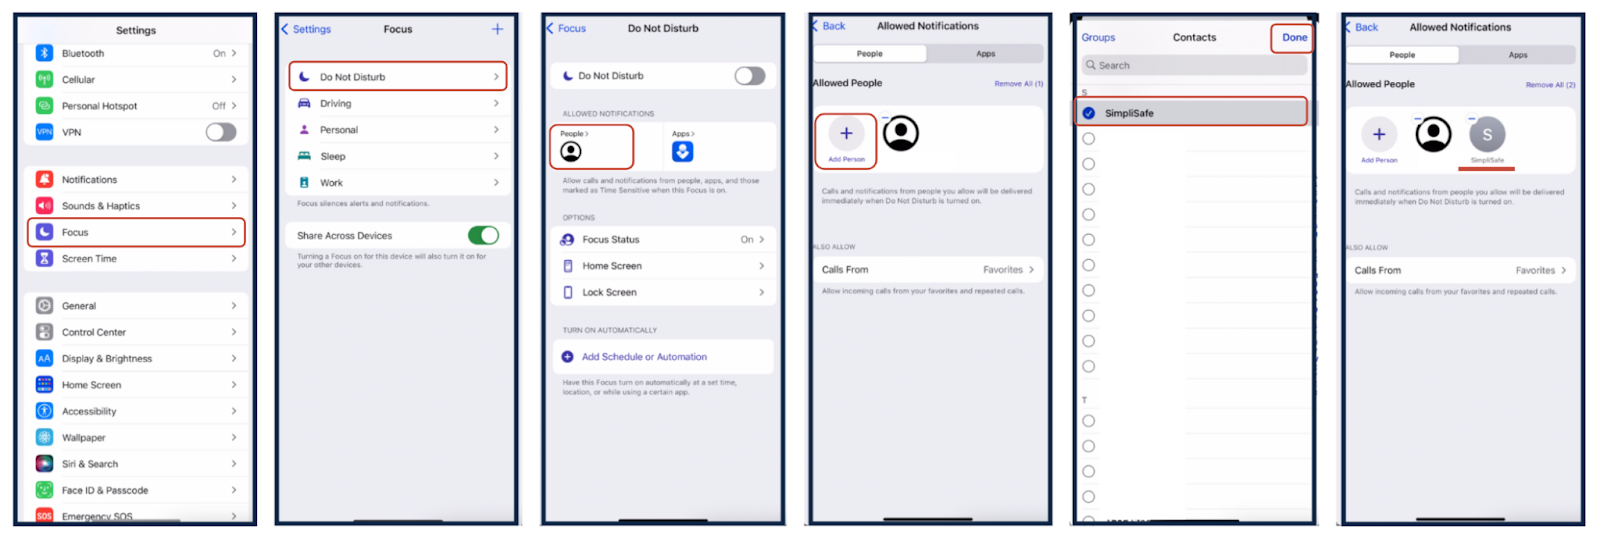 How to allow monitoring center's call through Do Not Disturb on iPhone, highlighting steps 2-7